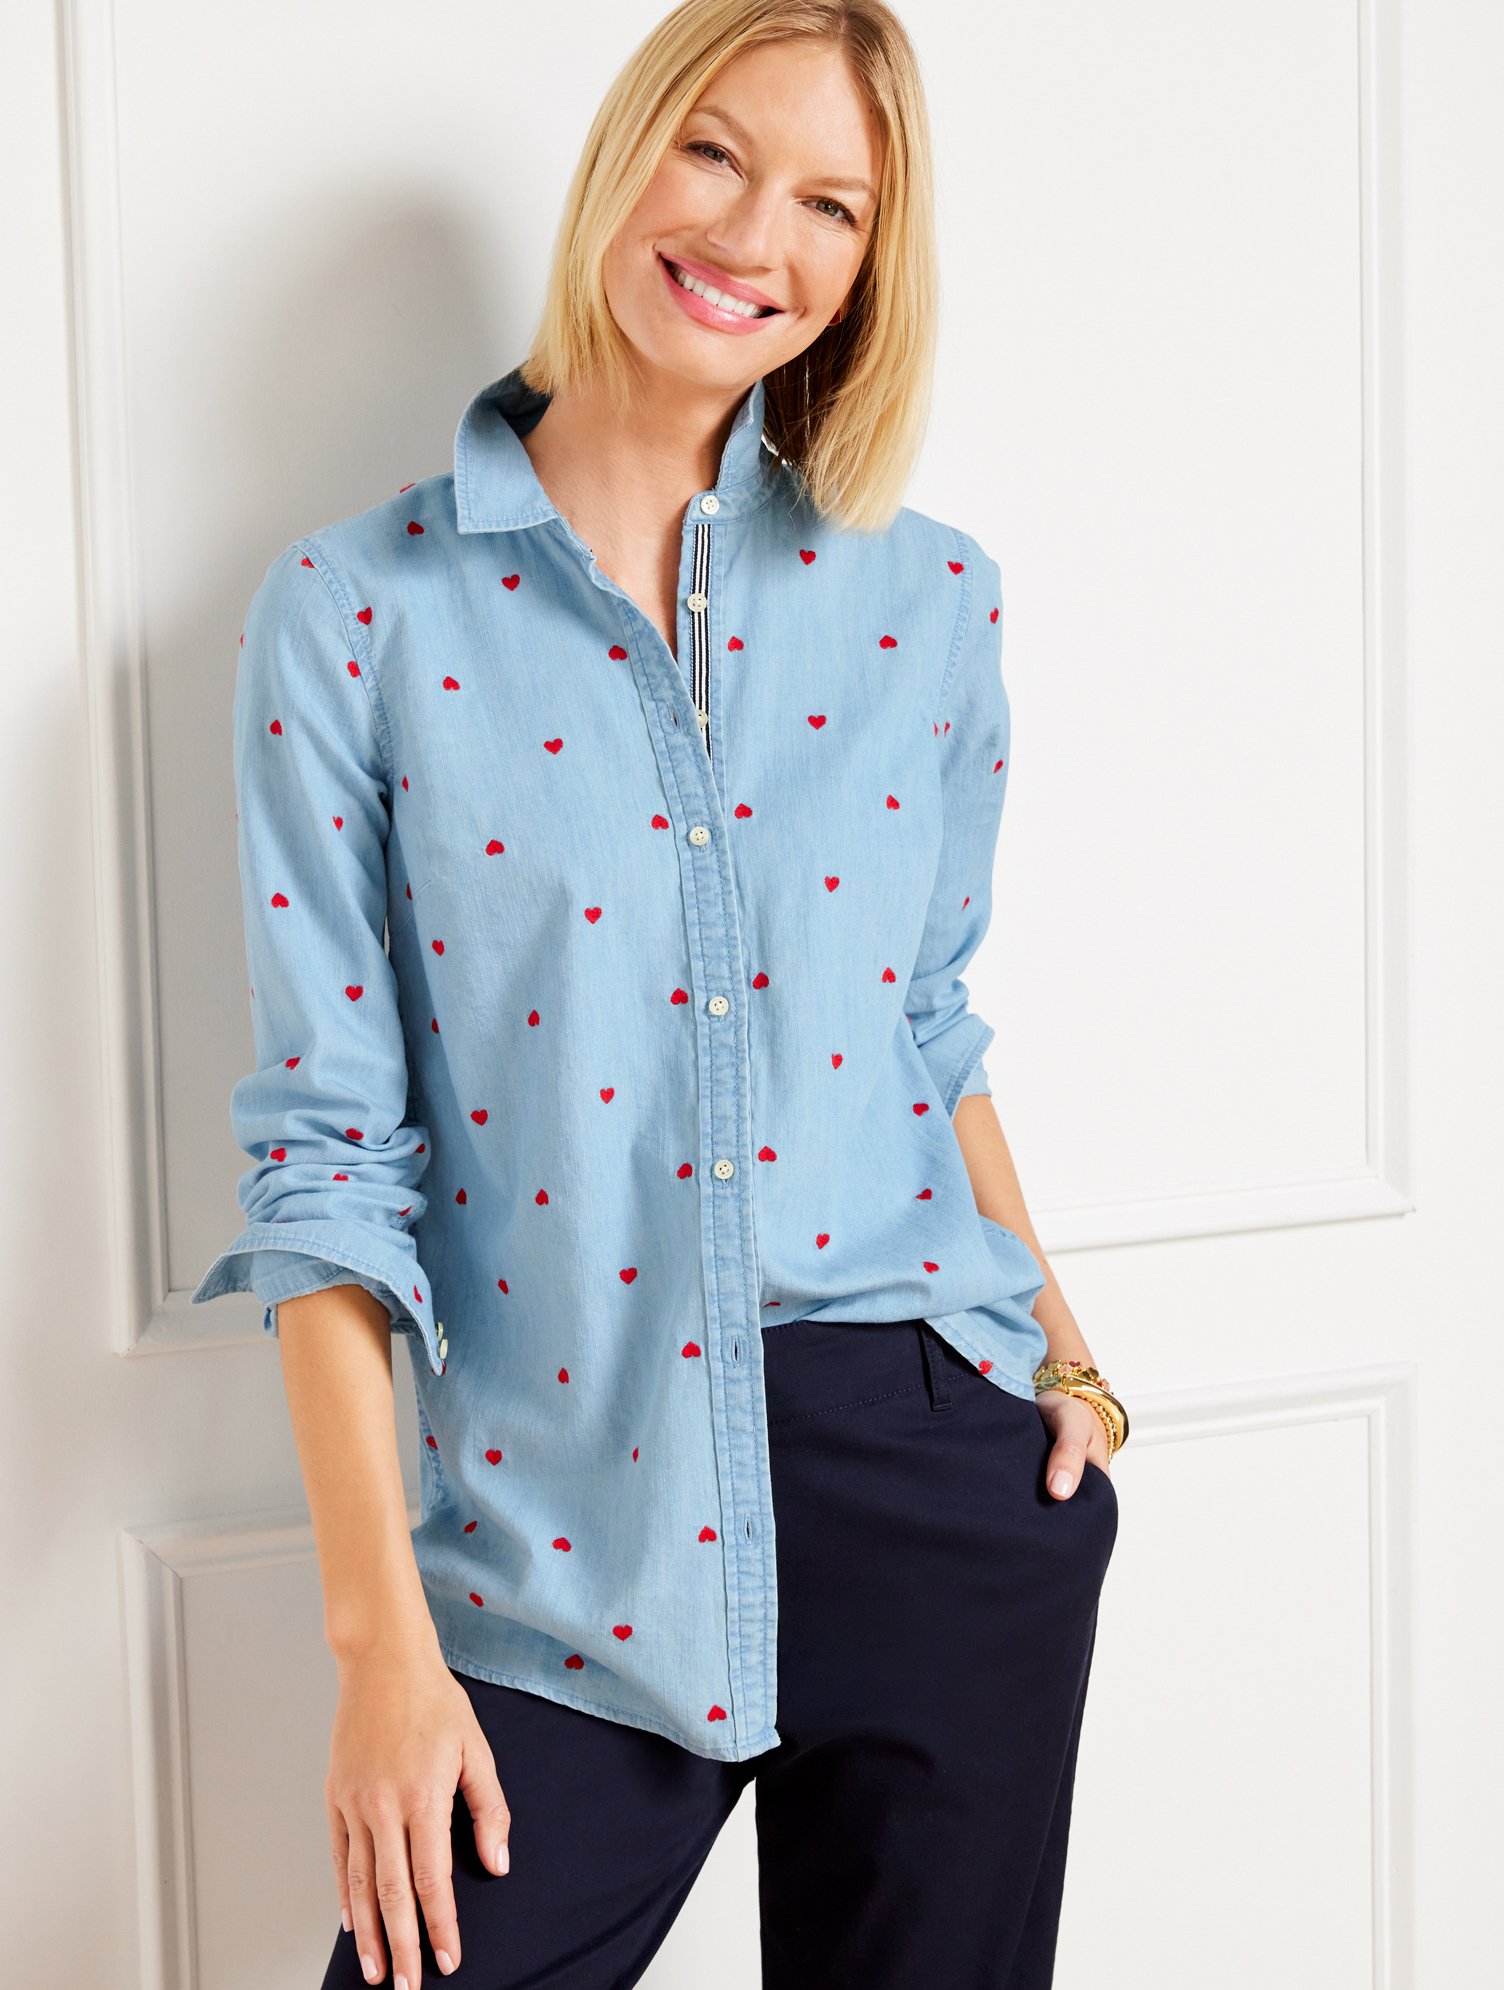 Talbots Petite - Denim Button Front Shirt - Embroidered Hearts - Light Blue/red - Large - 100% Cotton Talbot In Light Blue,red